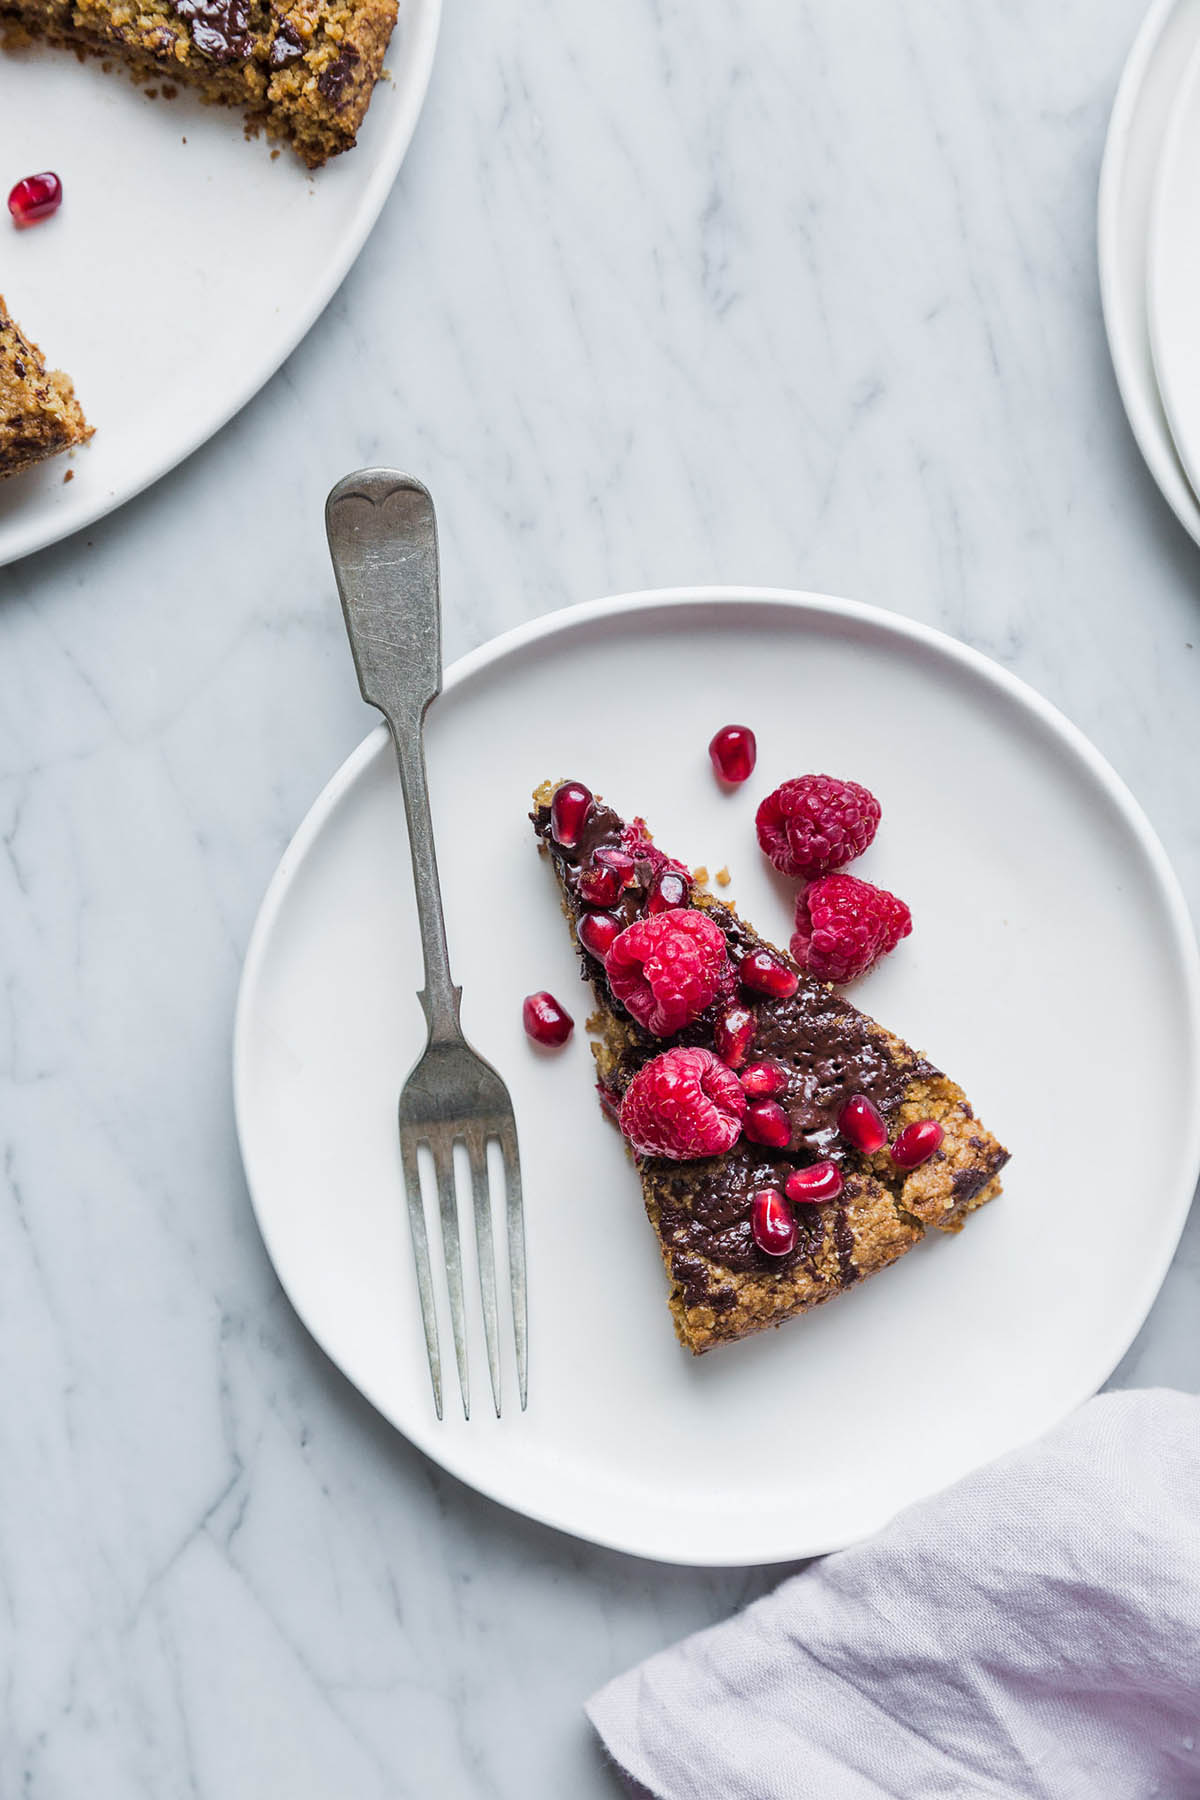 A slice of gluten free almond cake with chocolate chunks and raspberries.